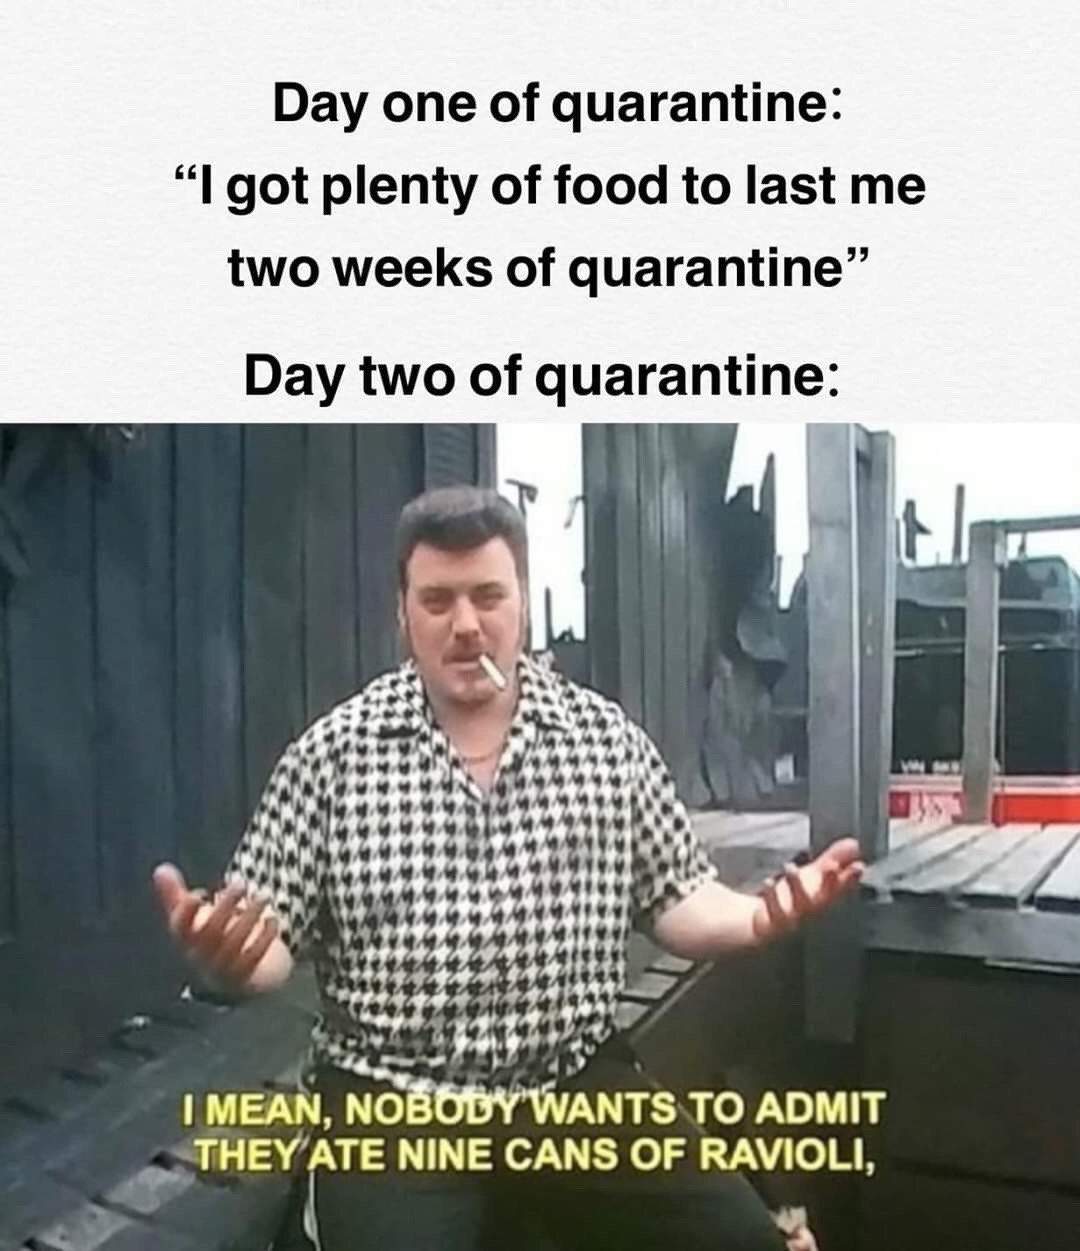 day one of quarantine meme - Day one of quarantine "I got plenty of food to last me two weeks of quarantine" Day two of quarantine I Mean, Nobody Wants To Admit They Ate Nine Cans Of Ravioli,